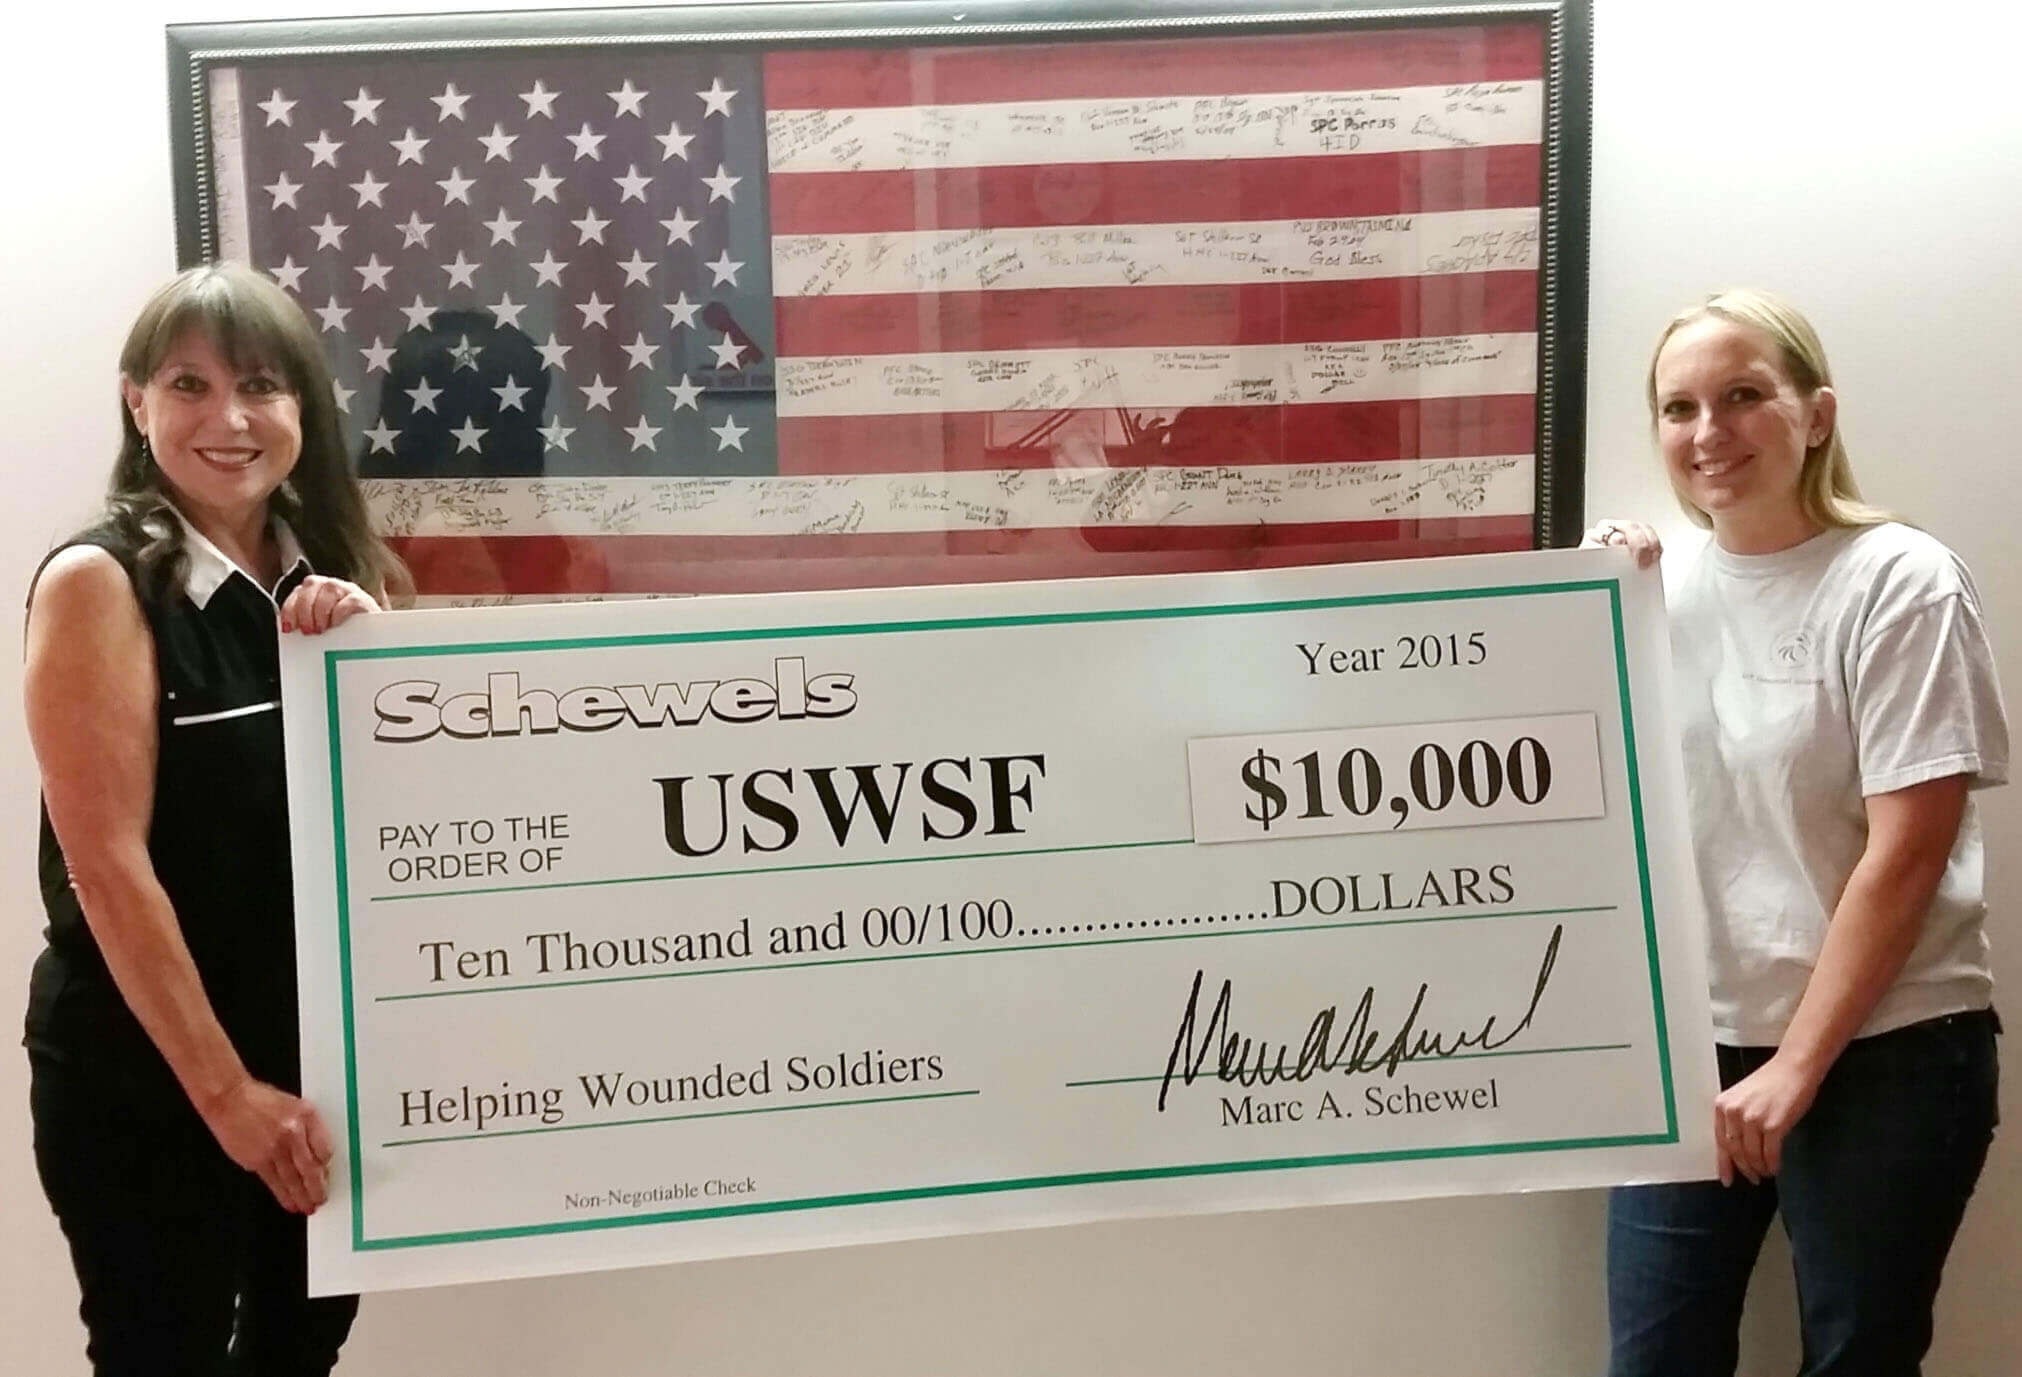 Schewel's Home presenting check to USWSF